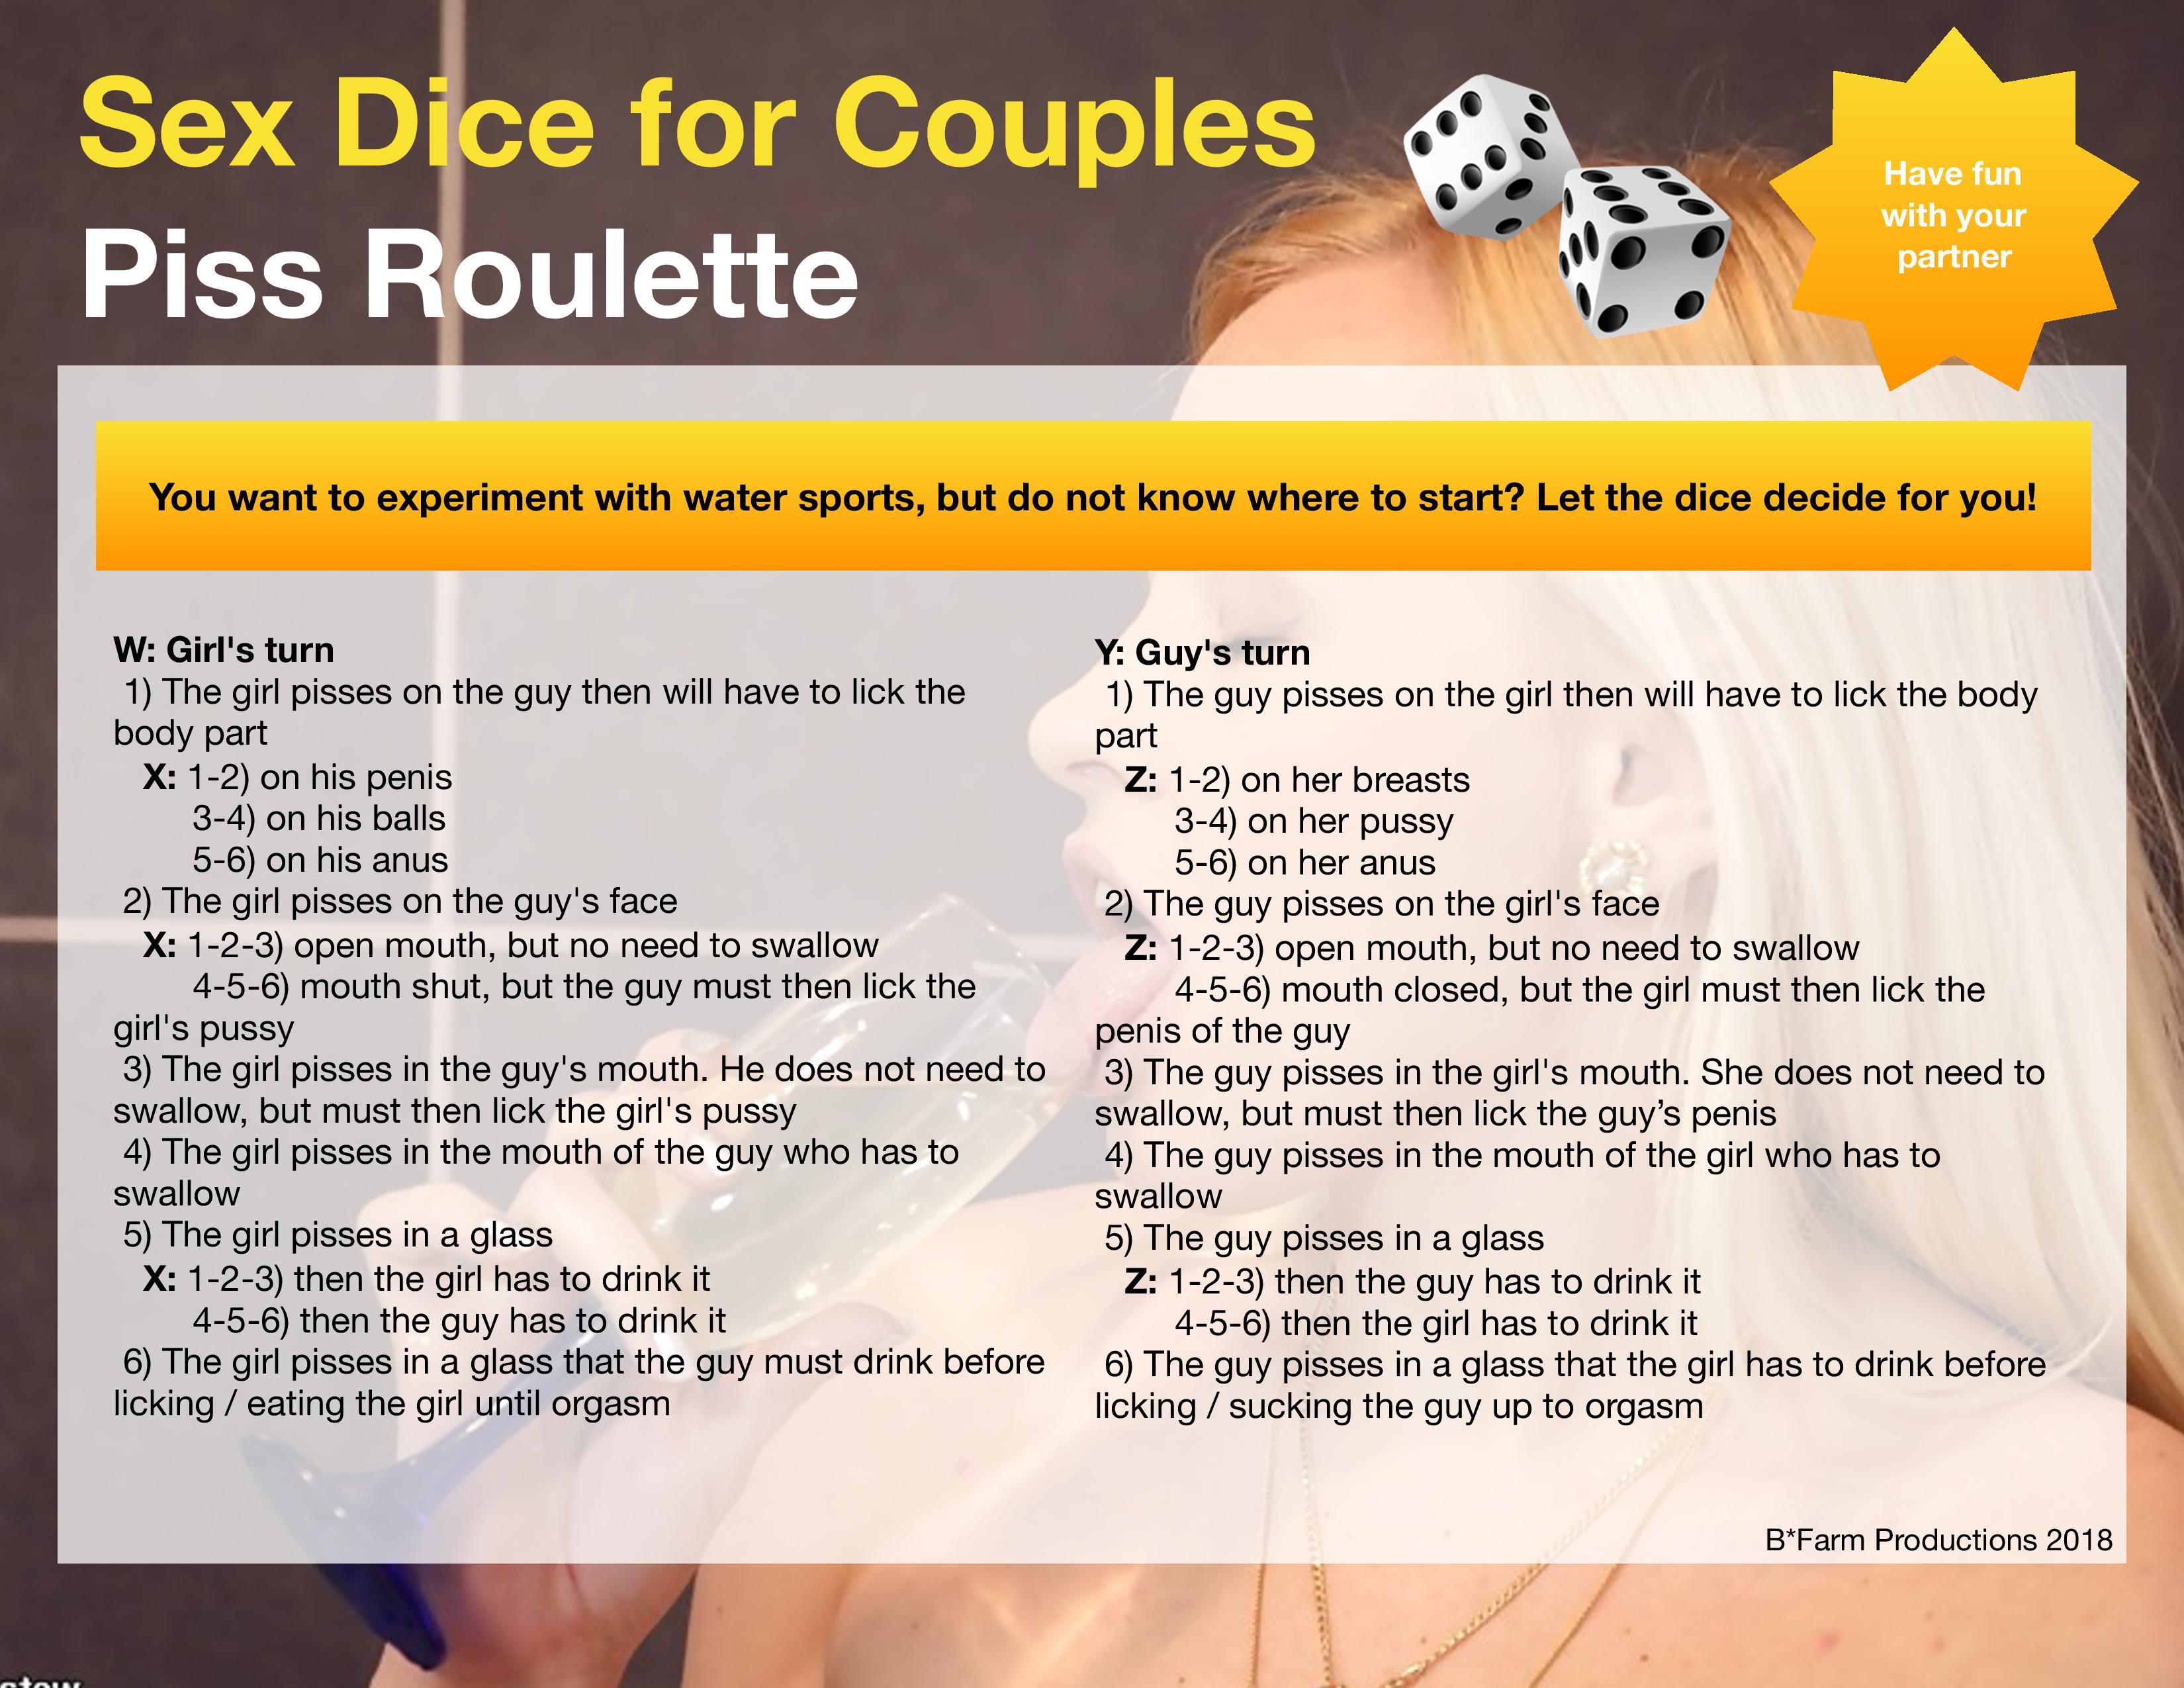 Sex Dice for Couples Piss Roulette image